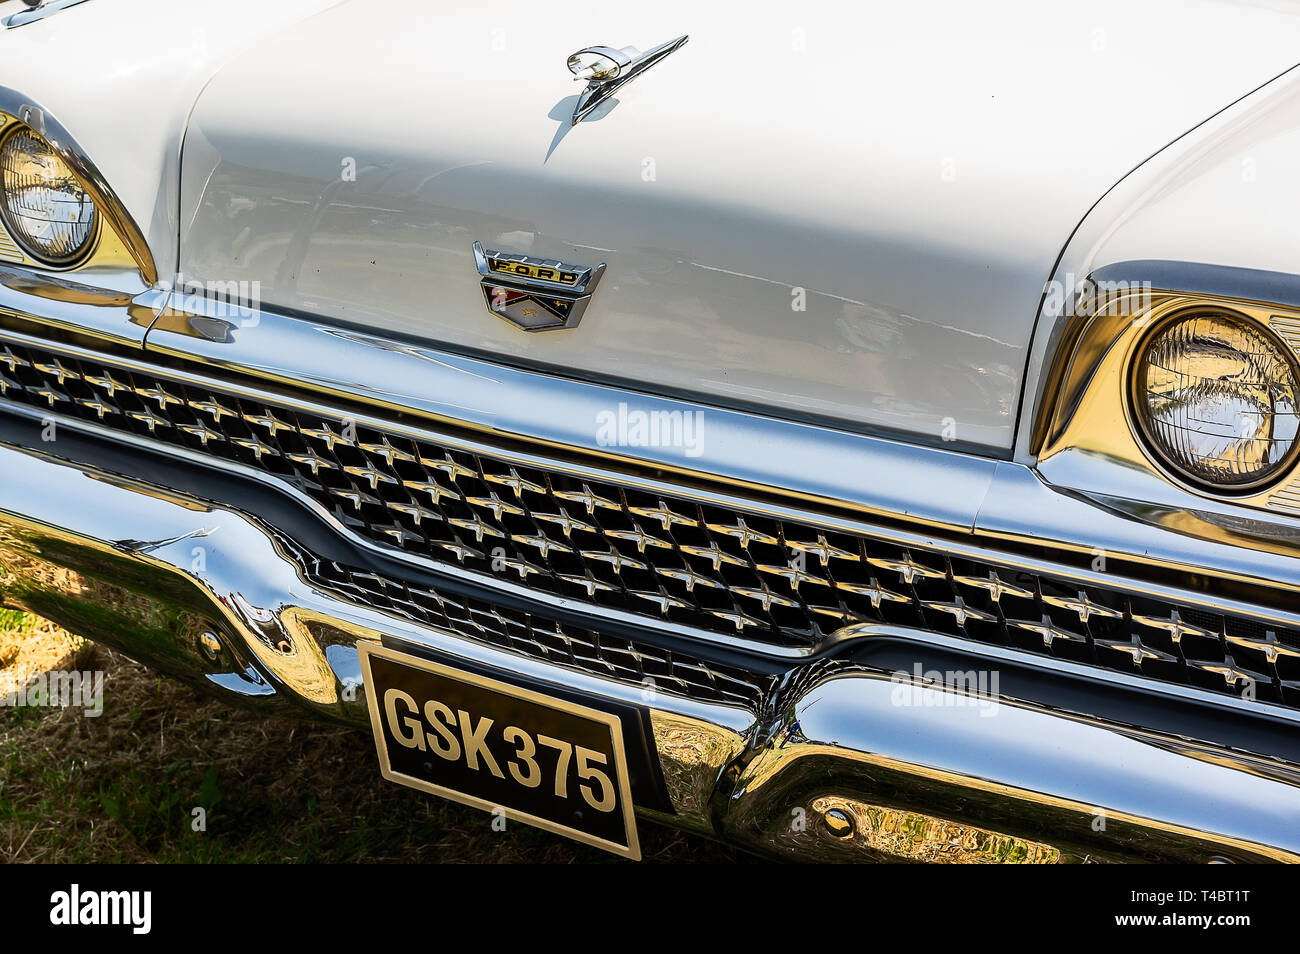 A 1959 Ford Galaxie on display at a car show Stock Photo